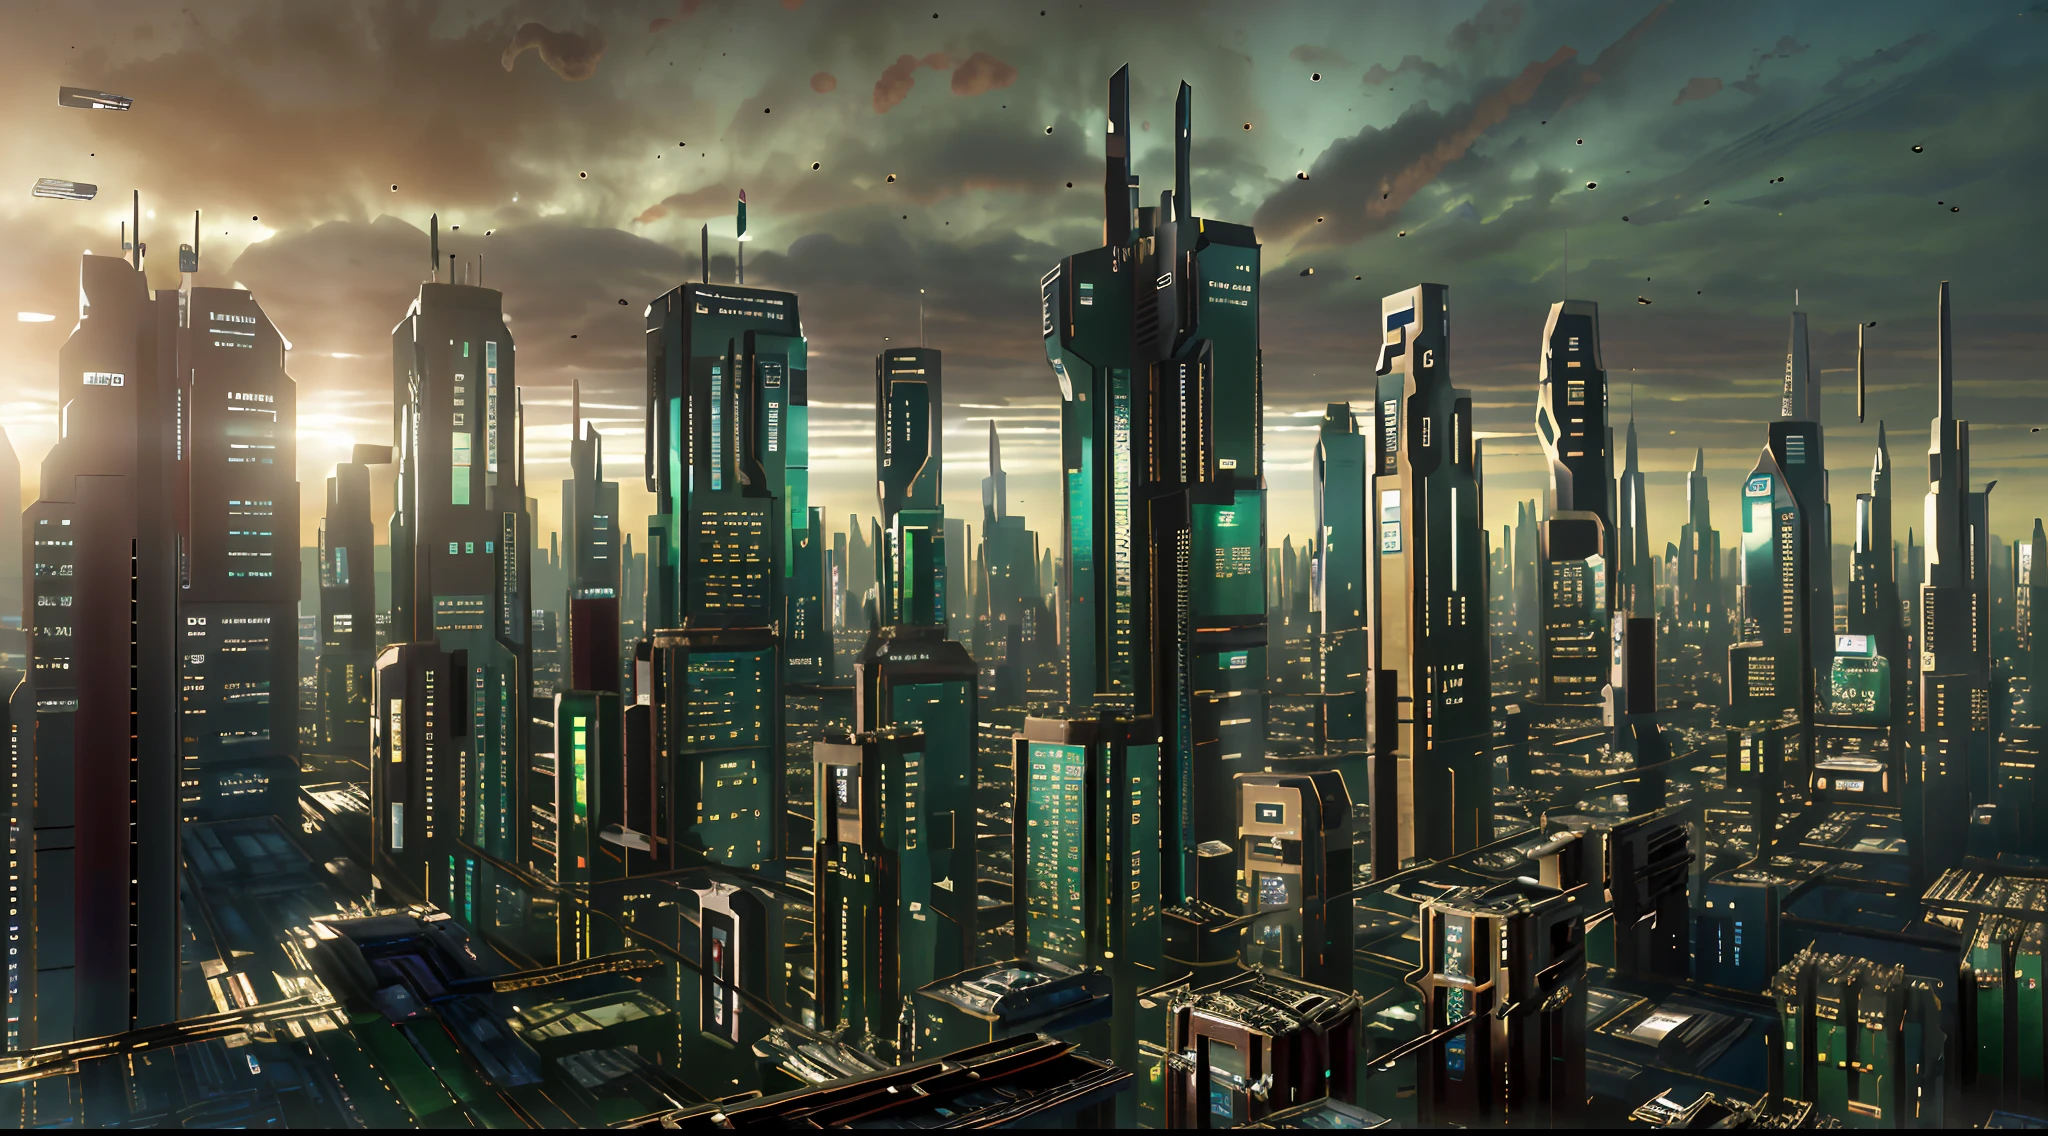 ((a cityscape view of a futuristic sci fi mega sprawling city)), ominous, dystopian city, masterpiece, 4k resolution, (flawless architecture), atmospheric, nature taking over city,